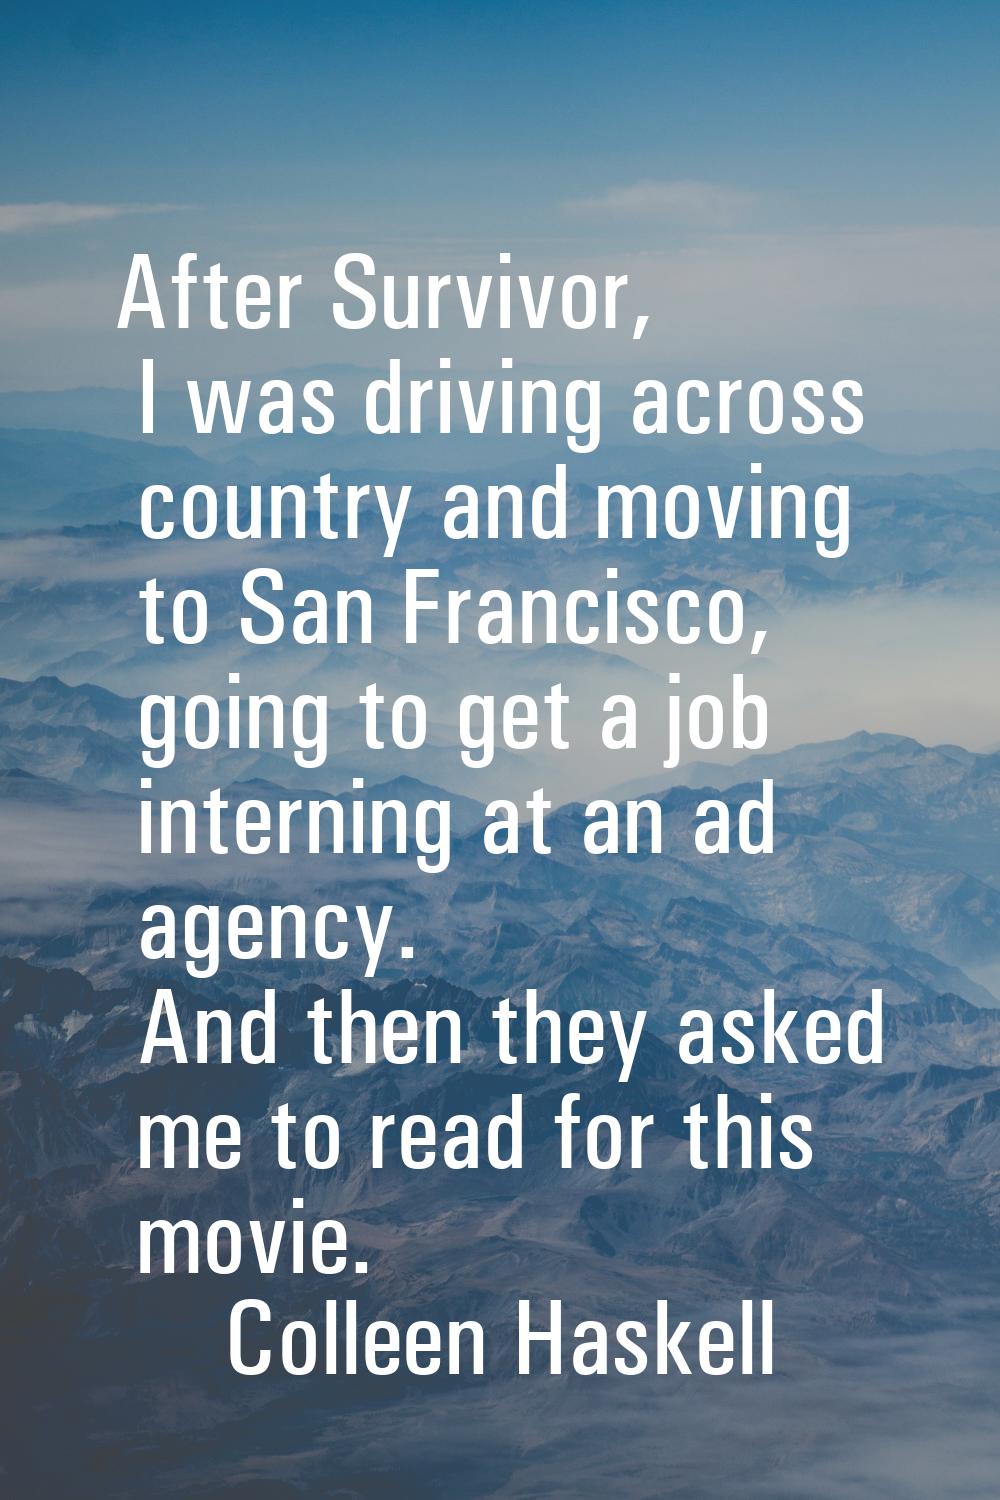 After Survivor, I was driving across country and moving to San Francisco, going to get a job intern